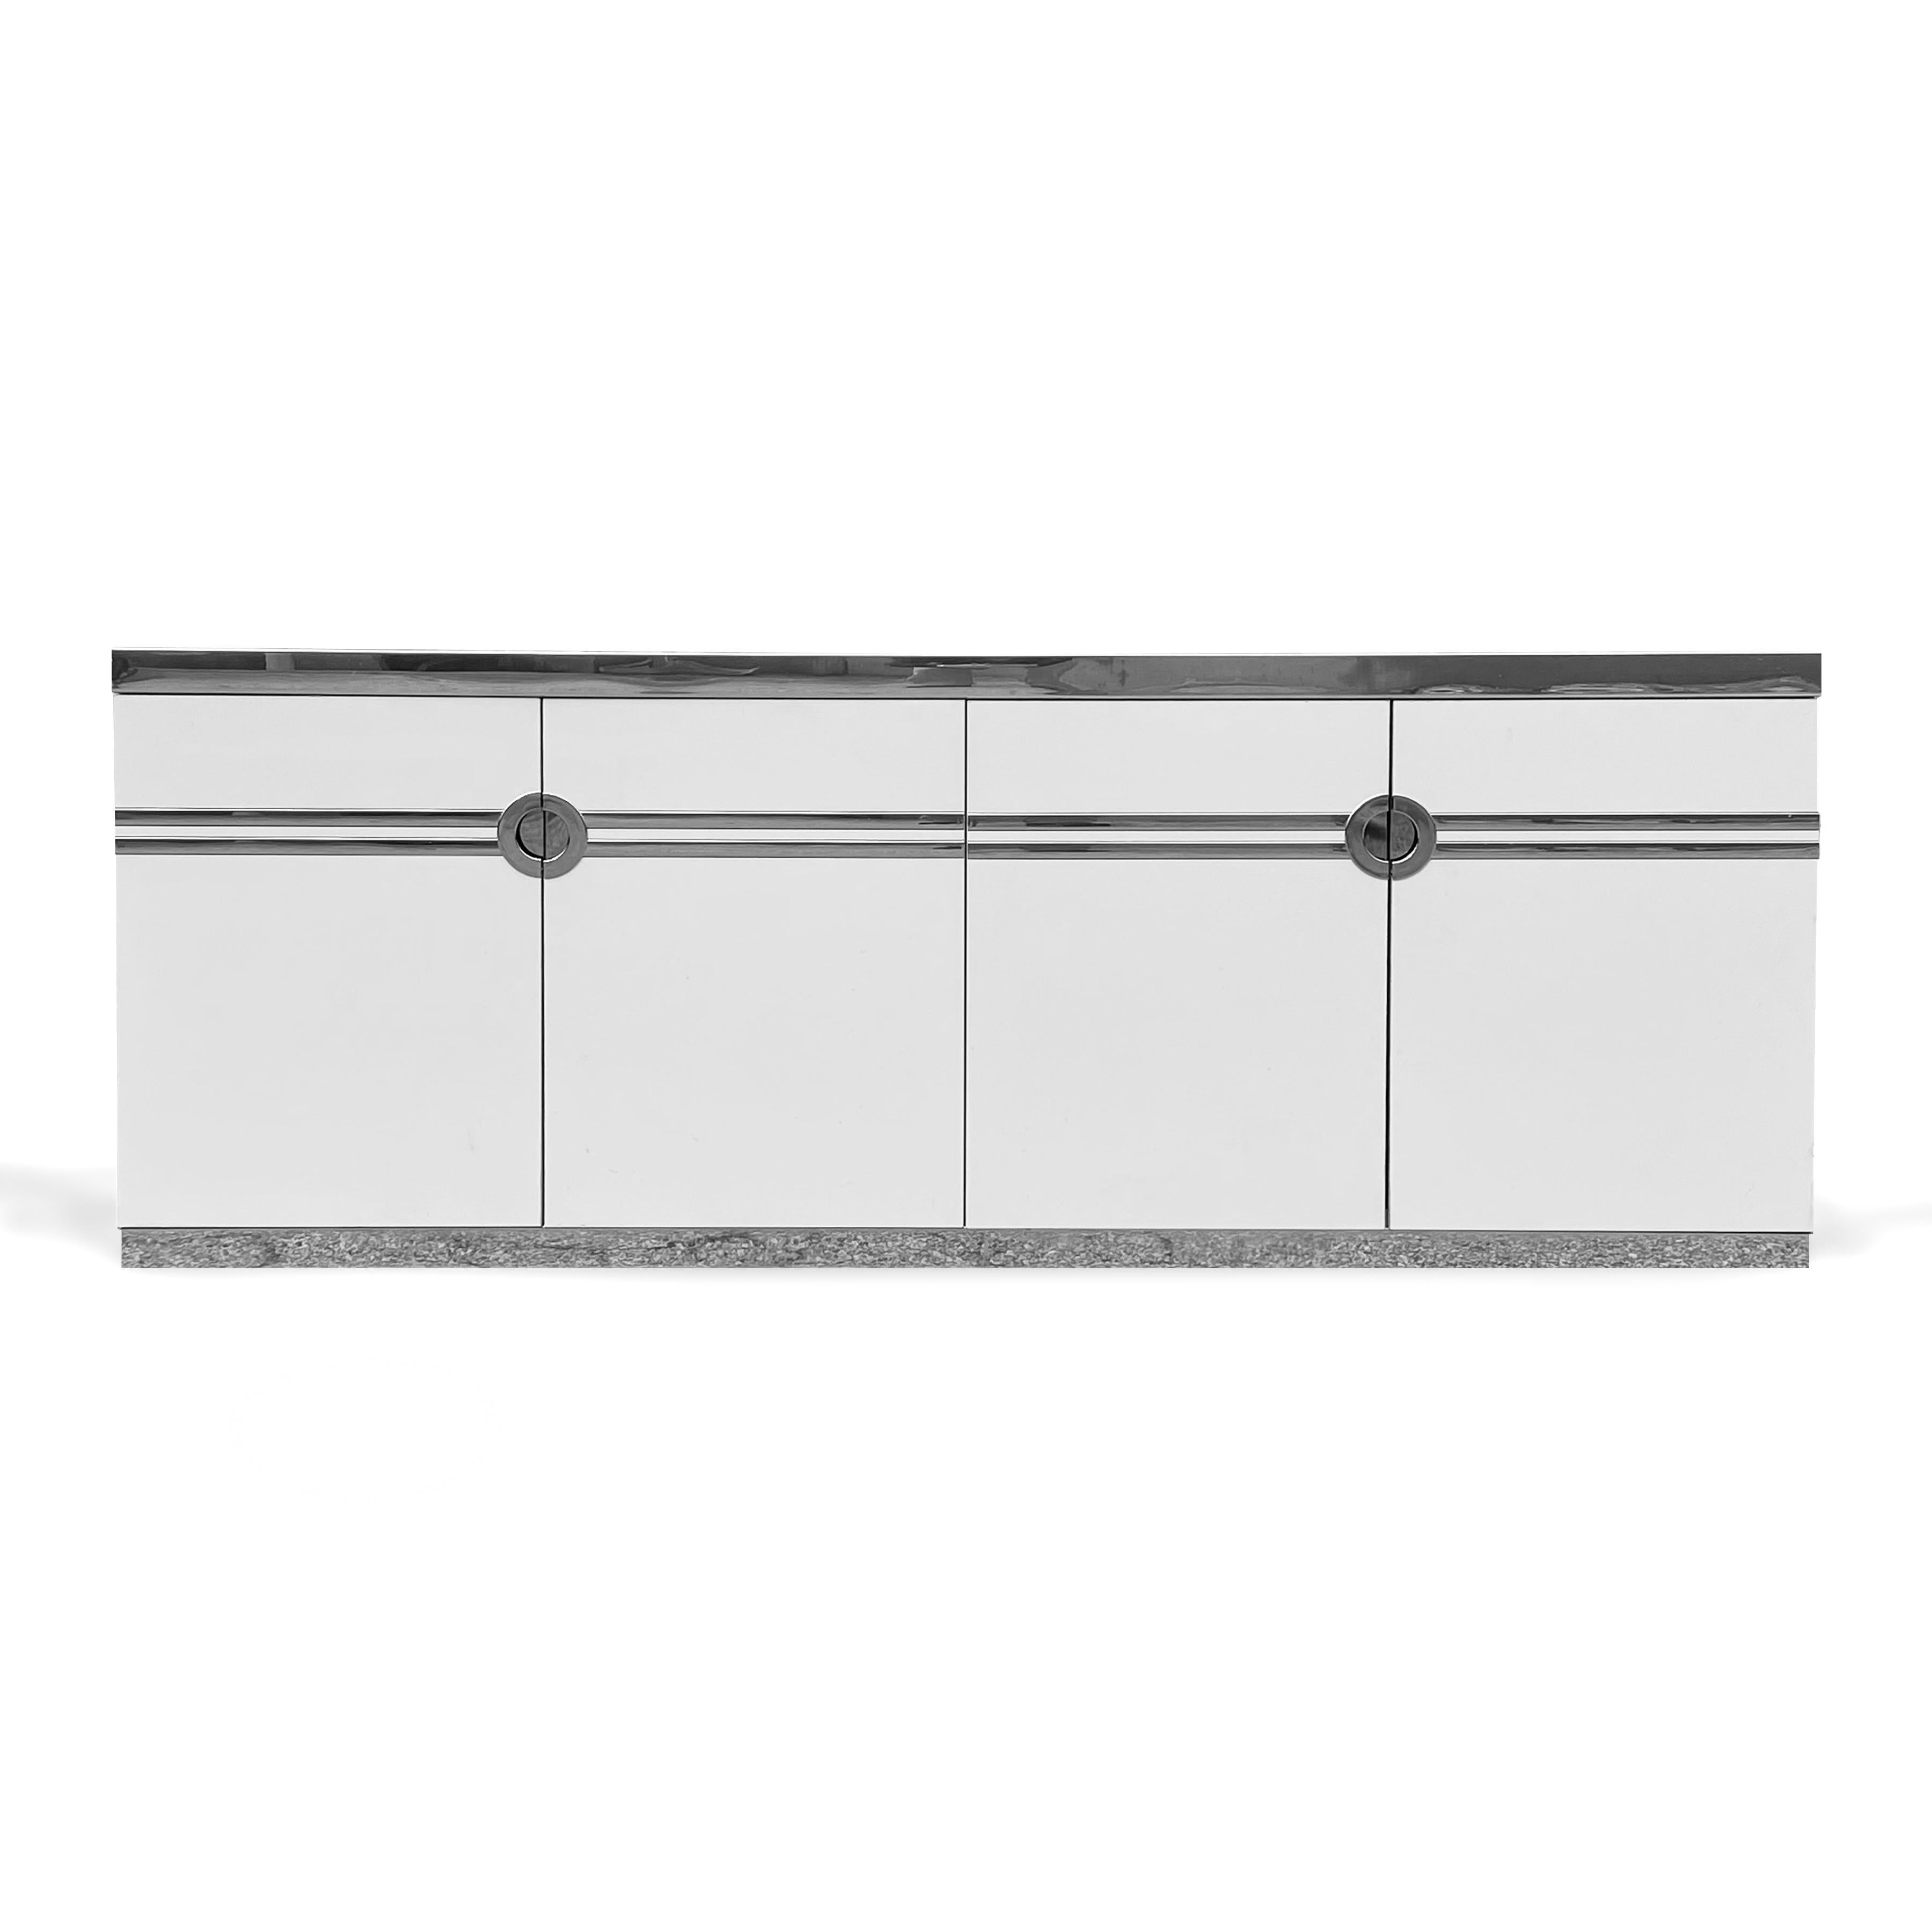 A sleek and sophisticated 1970s design by Pierre Cardin, this long, low white cabinet has linear graphic elements and recessed pulls in chrome. The piece references art deco design, but is decidedly modern. Four doors conceal two cabinets each with